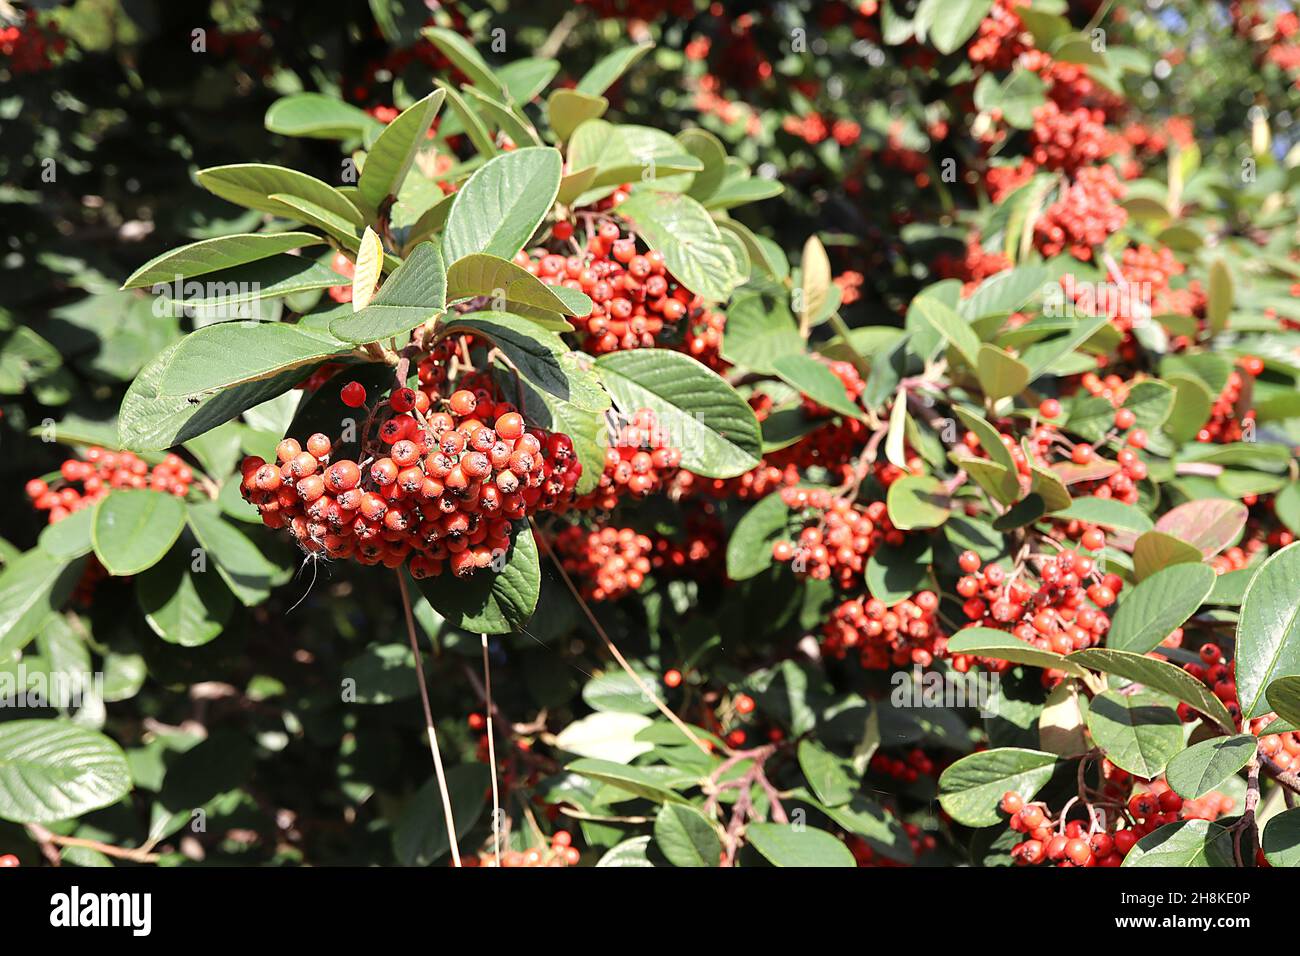 Cotoneaster lacteus late cotoneaster – large stalked clusters of glossy round red berries and dark green ovate leaves,  November, England, UK Stock Photo